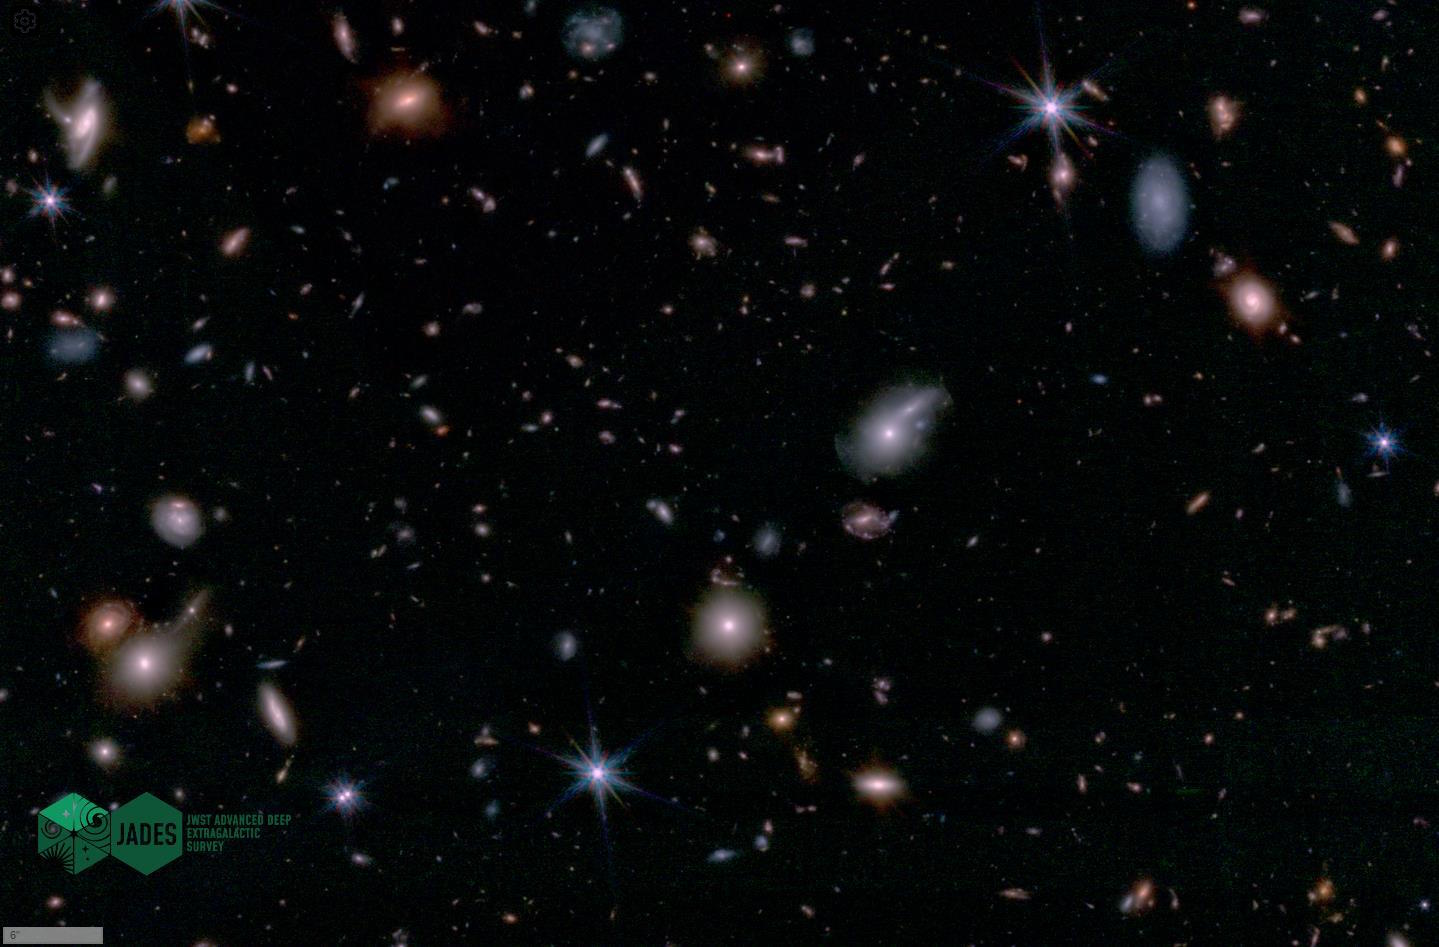 The JWST captures the deepest view of a dark night sky, revealing a large group of galaxies.